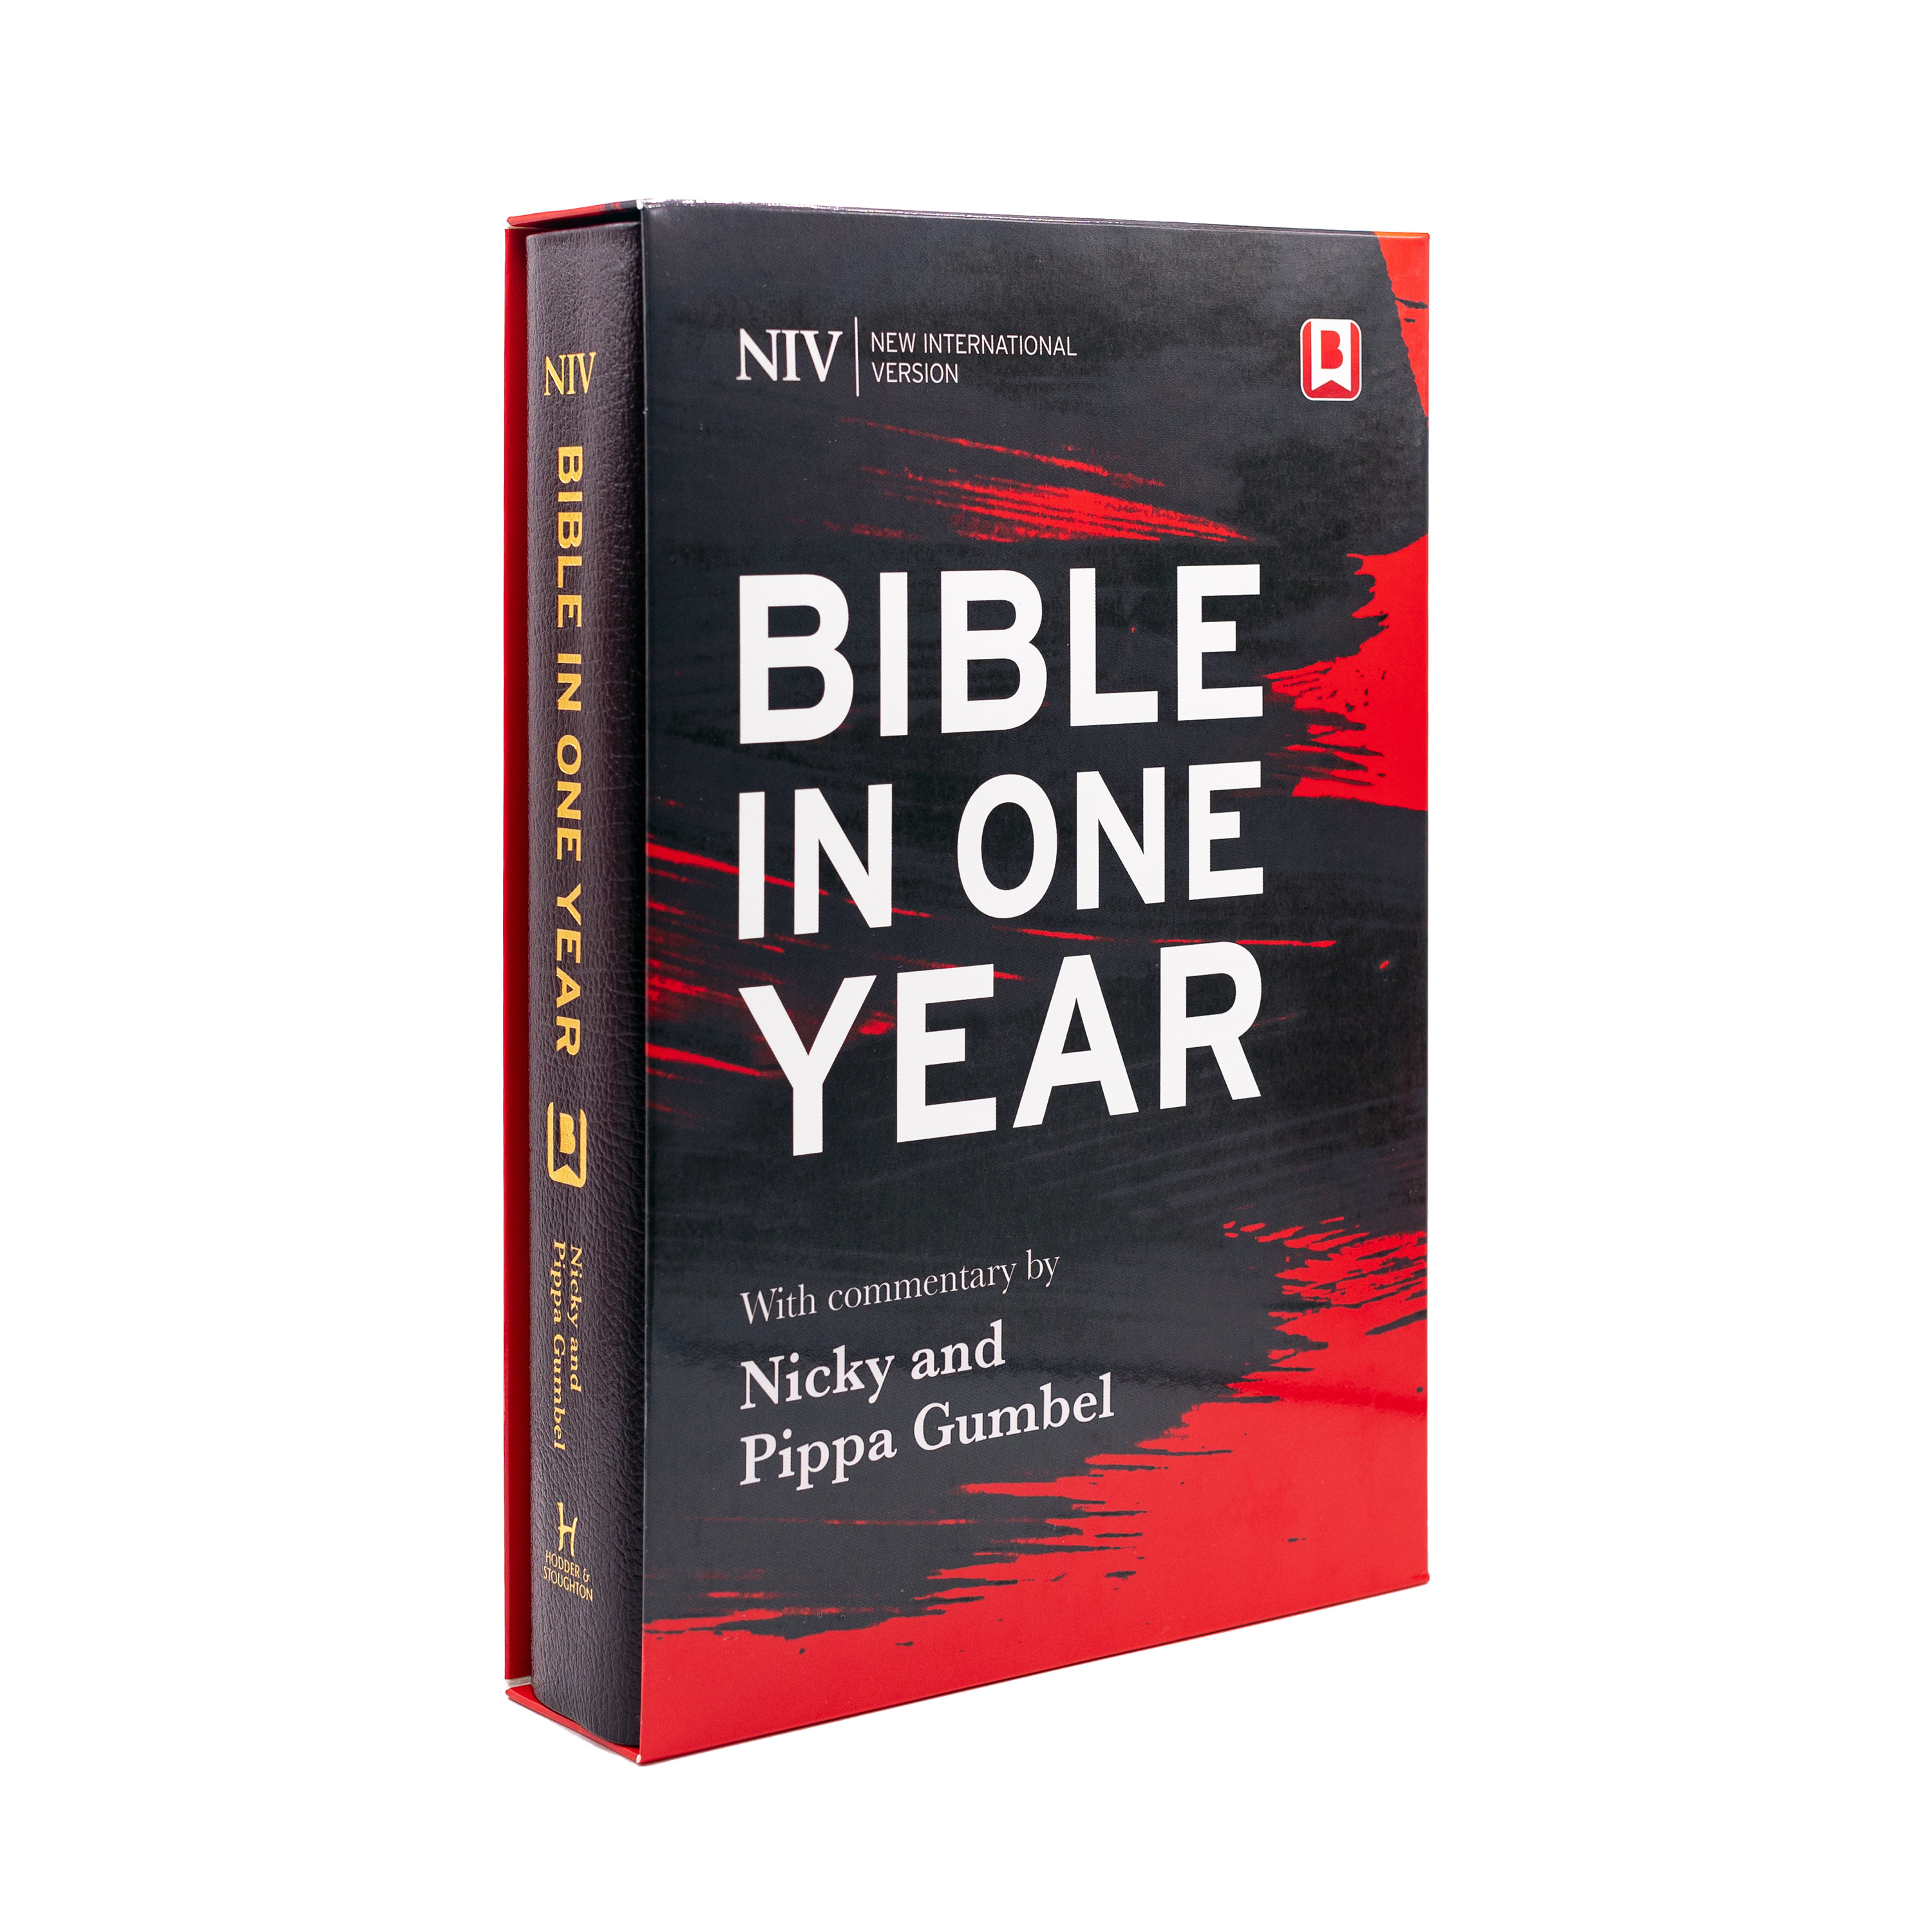 NIV Bible in One Year with Commentary by Nicky & Pippa Gumbel 9781399801331